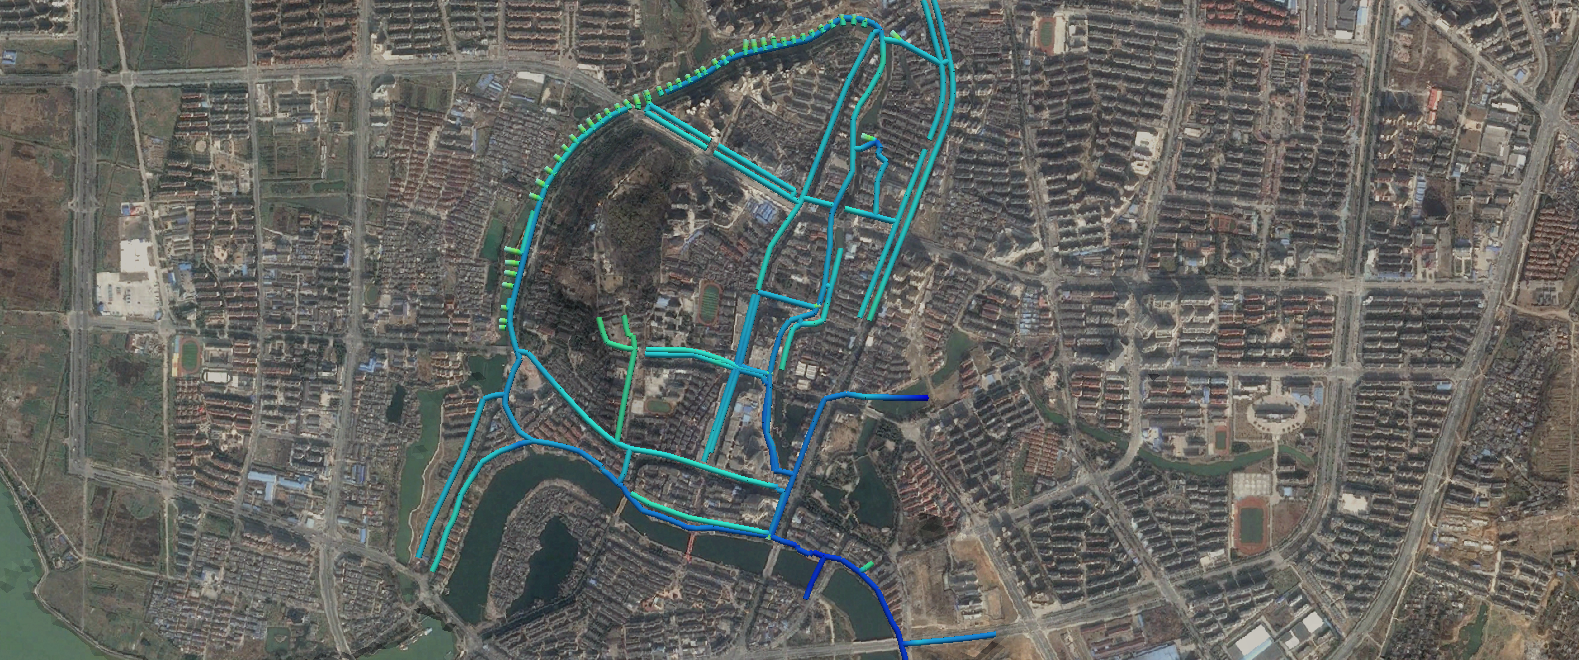 A SWMM-Model for the Chaohu city centre